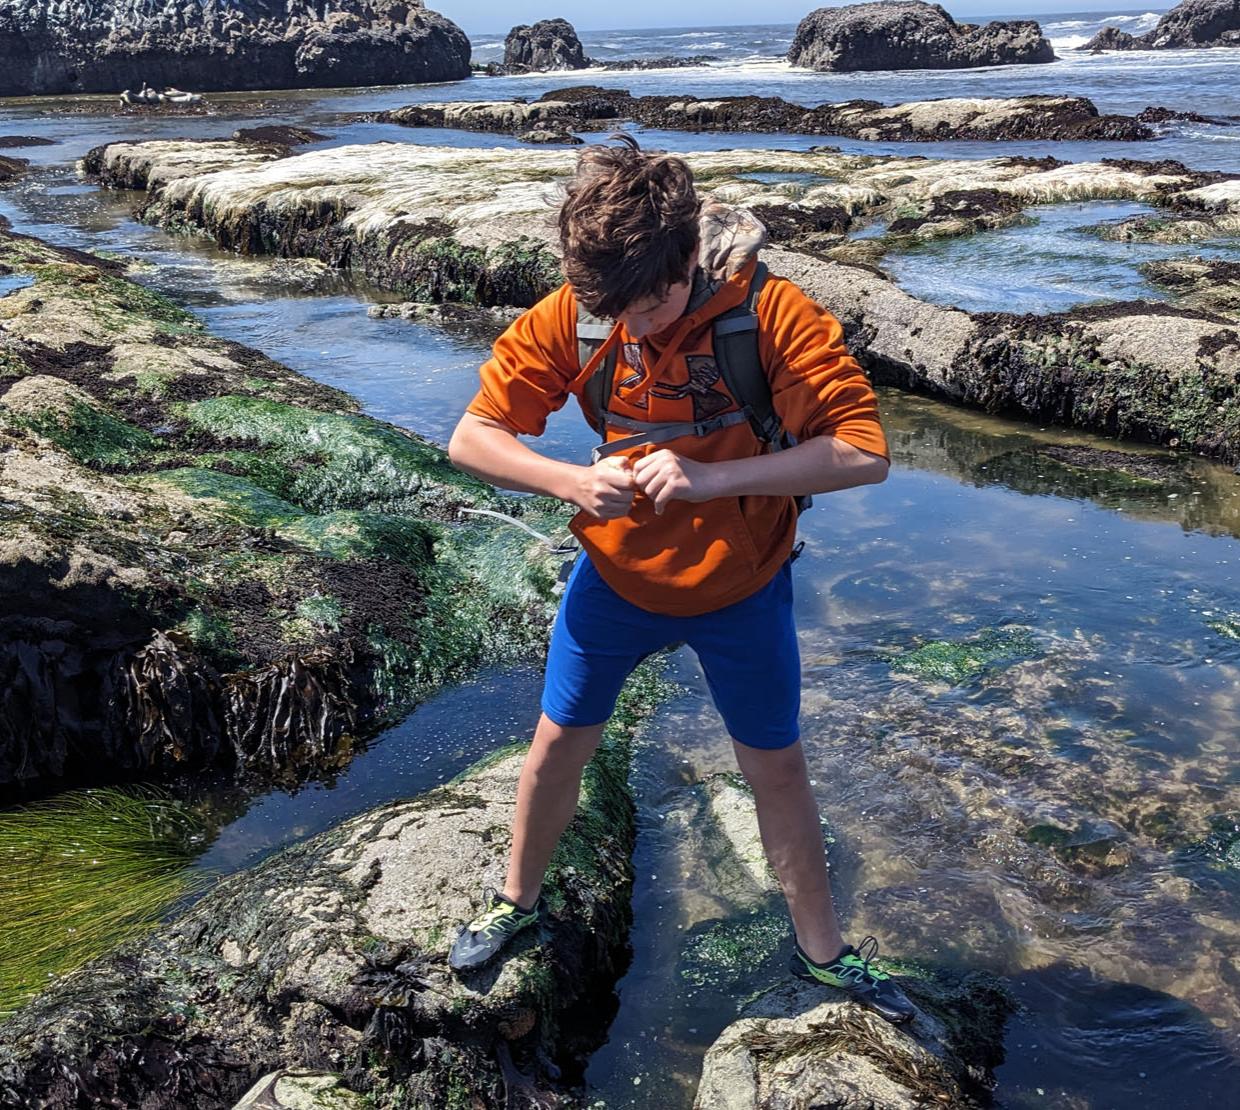 A kid stands in the water holding wildlife on the Oregon coast